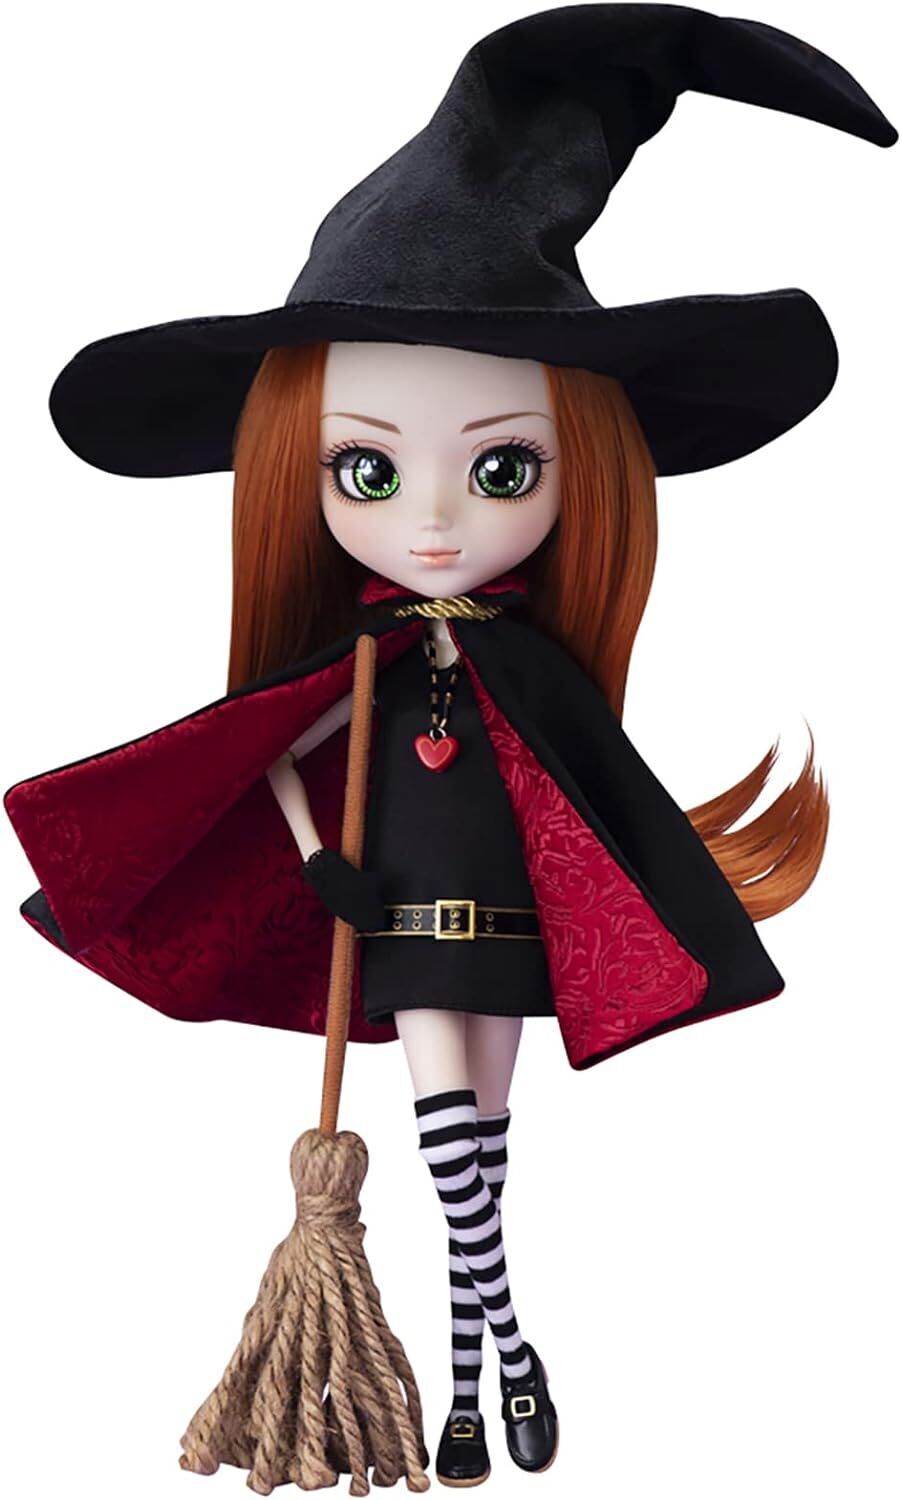 Groove Pullip Suger Suger Rune/Chocolat Meilleure P-281 310mm Action Figure Doll